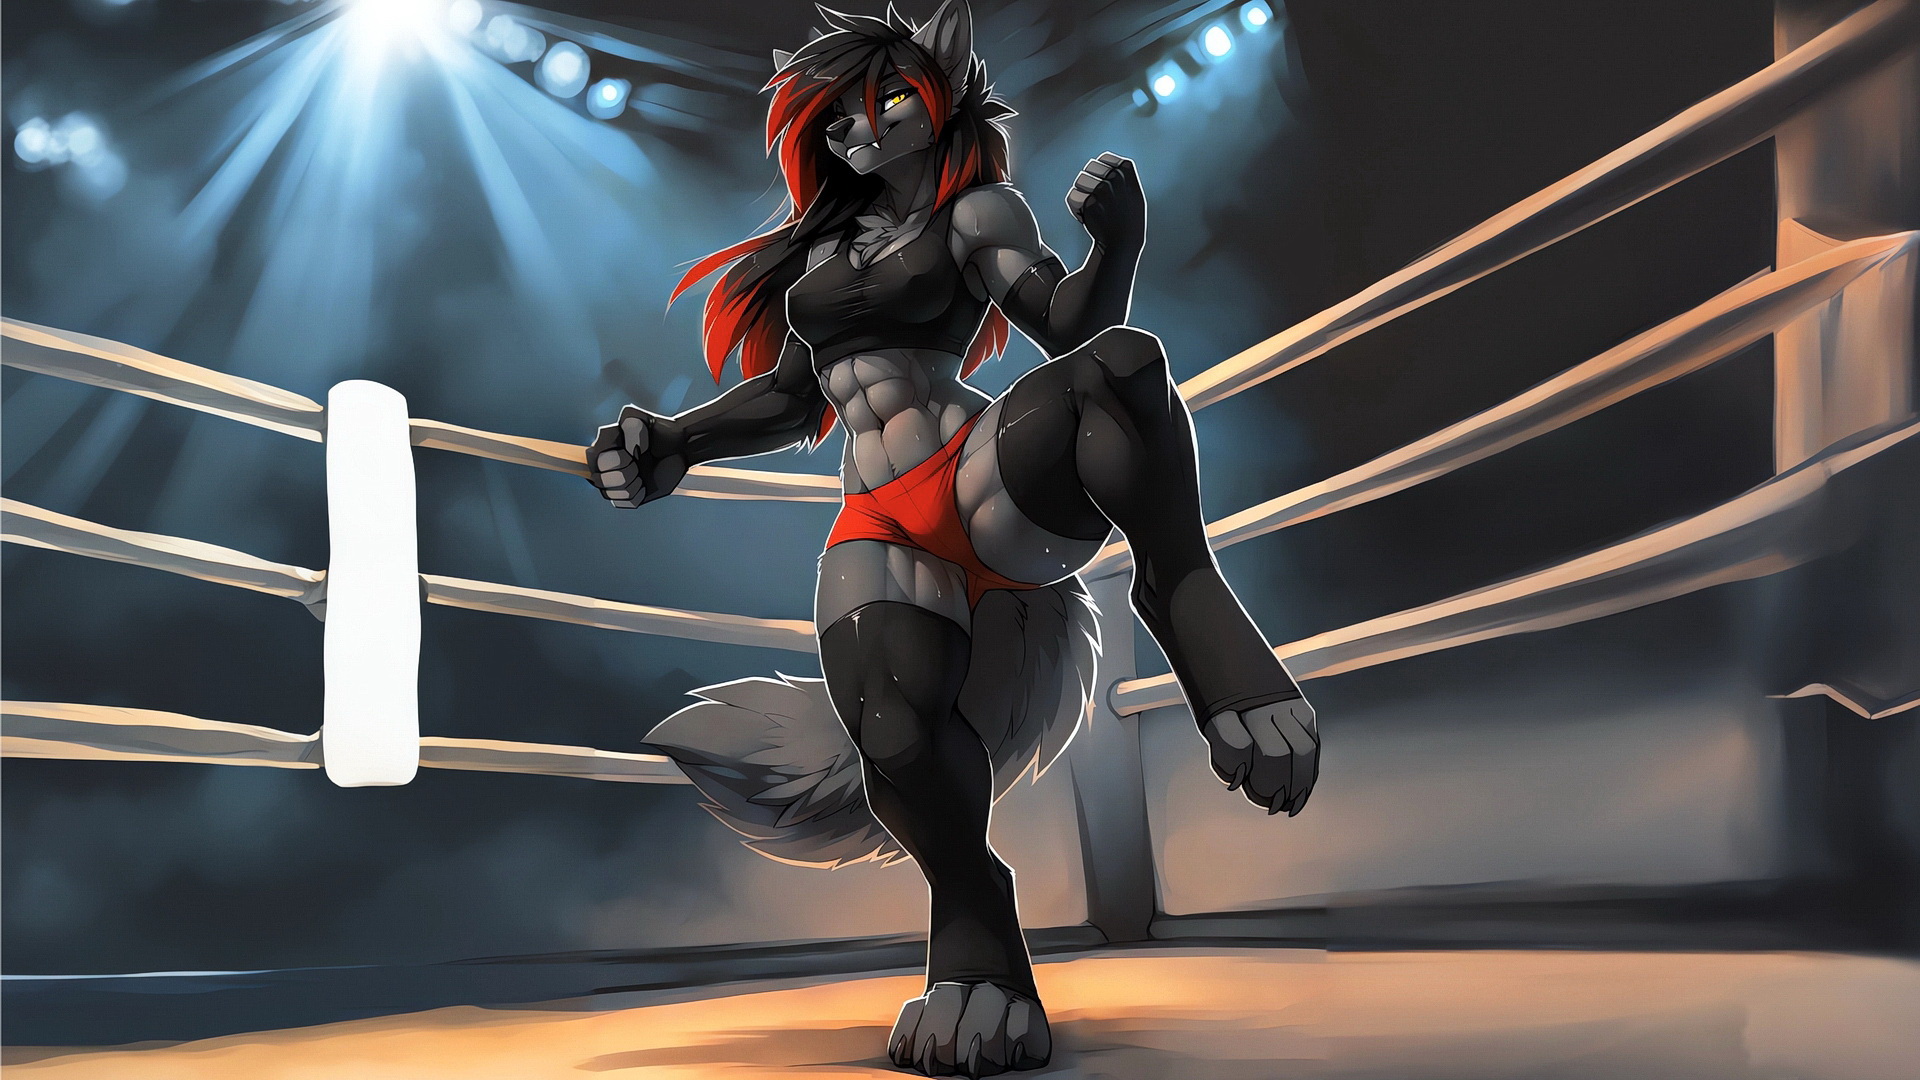 Furry she-wolf in the ring